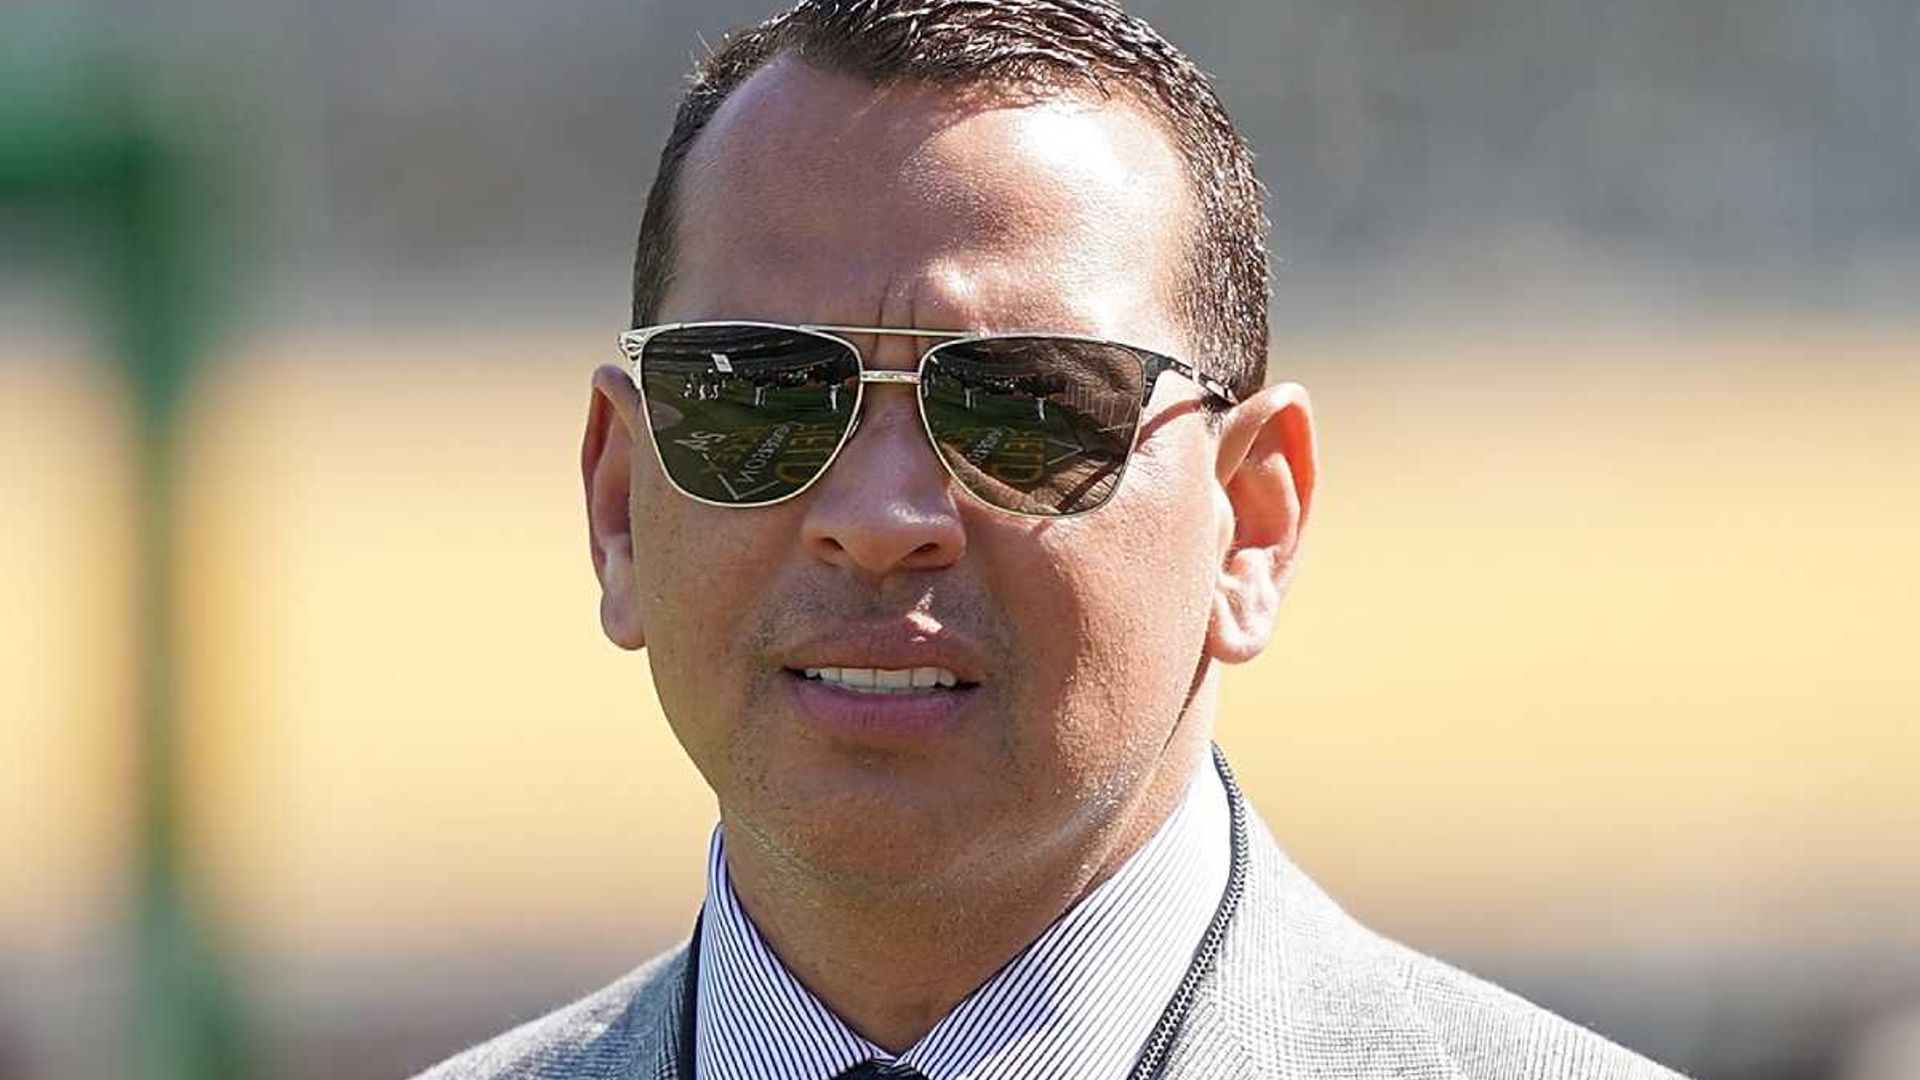 Alex Rodriguez seen with new woman after Kathryne Padgett split